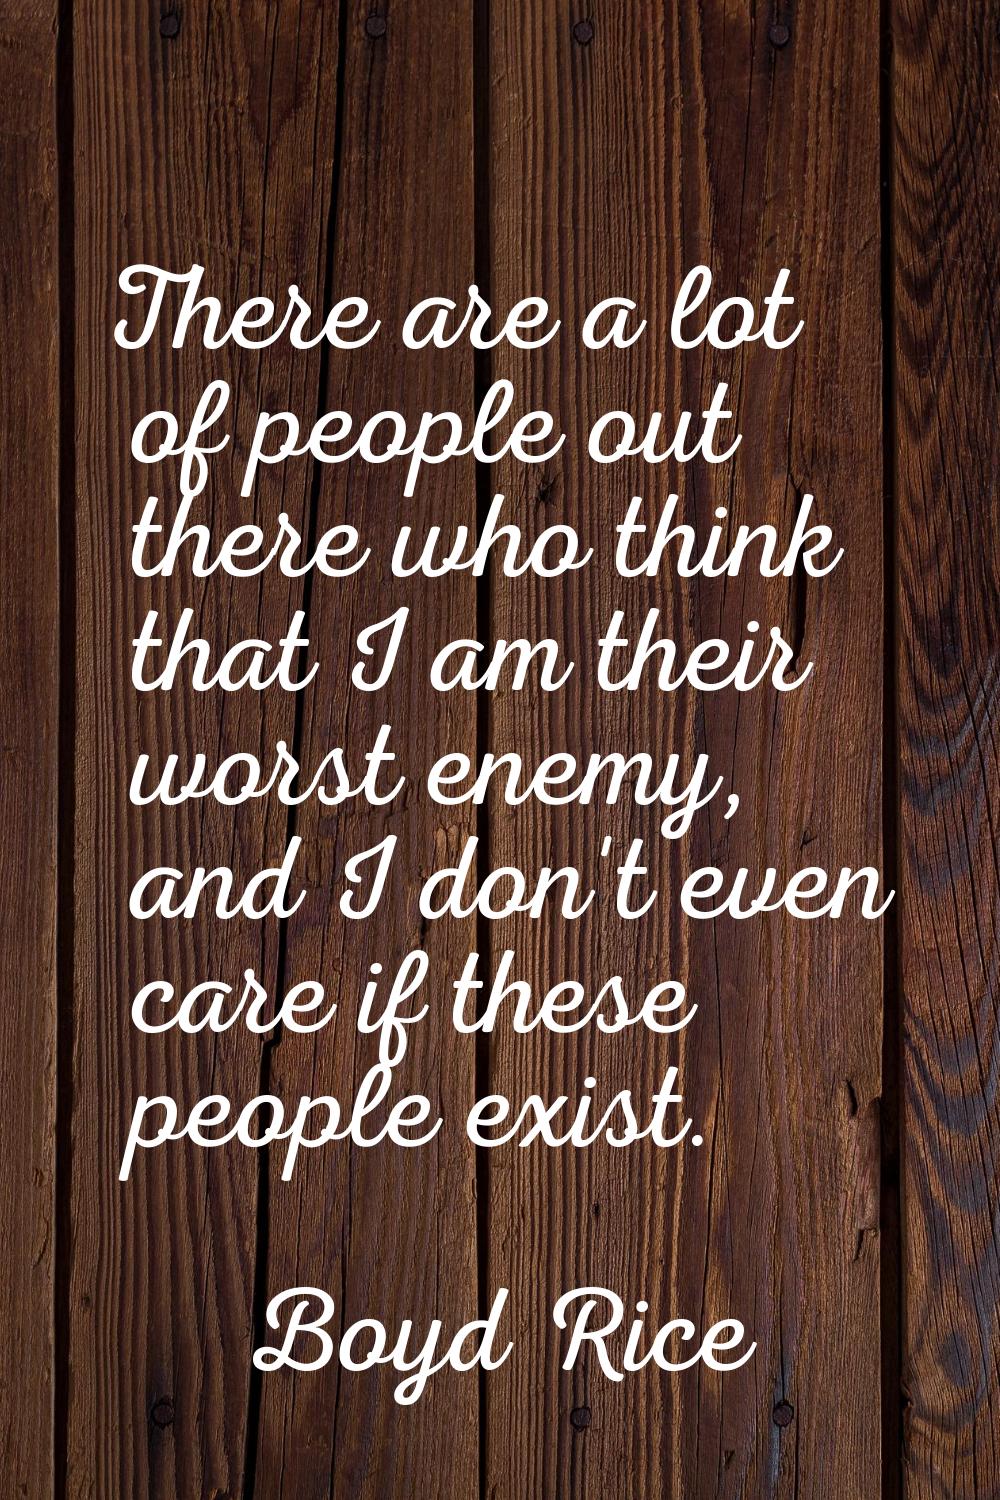 There are a lot of people out there who think that I am their worst enemy, and I don't even care if